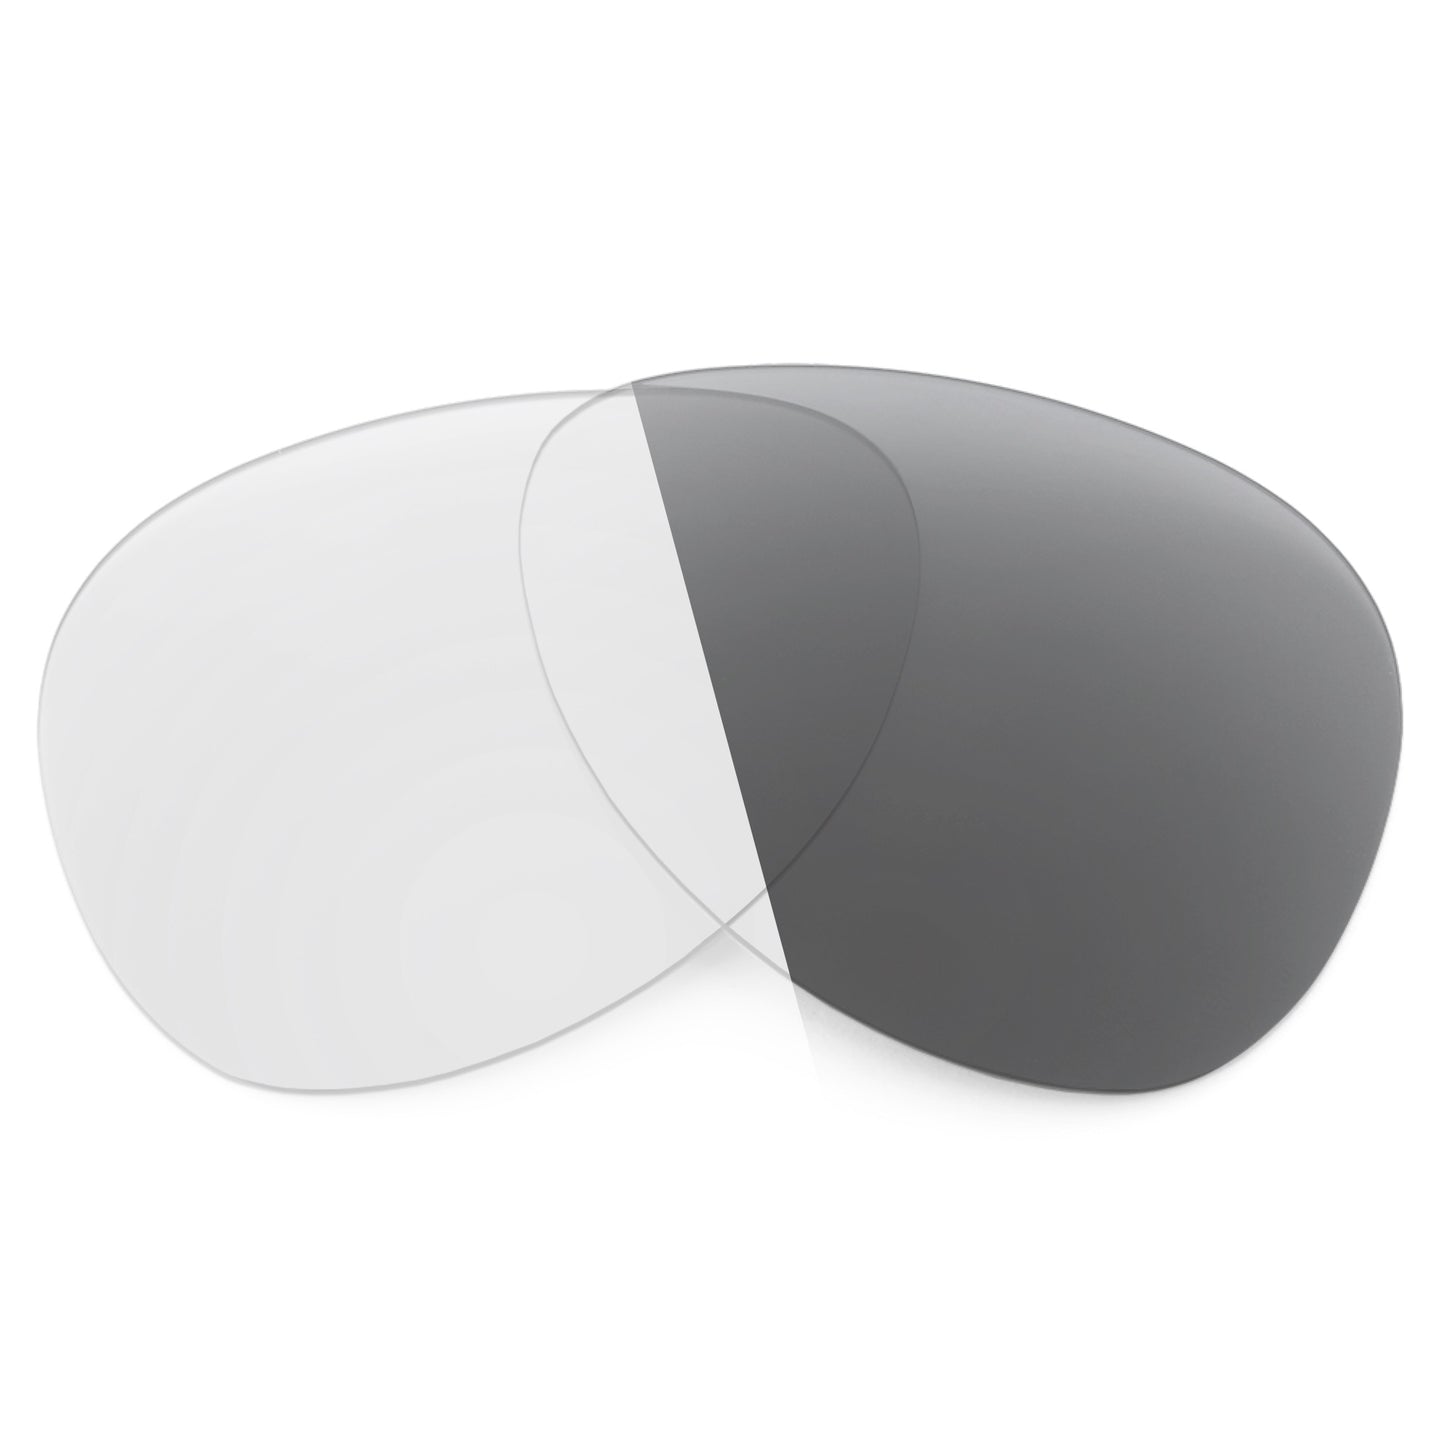 Revant replacement lenses for Ray-Ban RB4147 56mm Non-Polarized Adapt Gray Photochromic